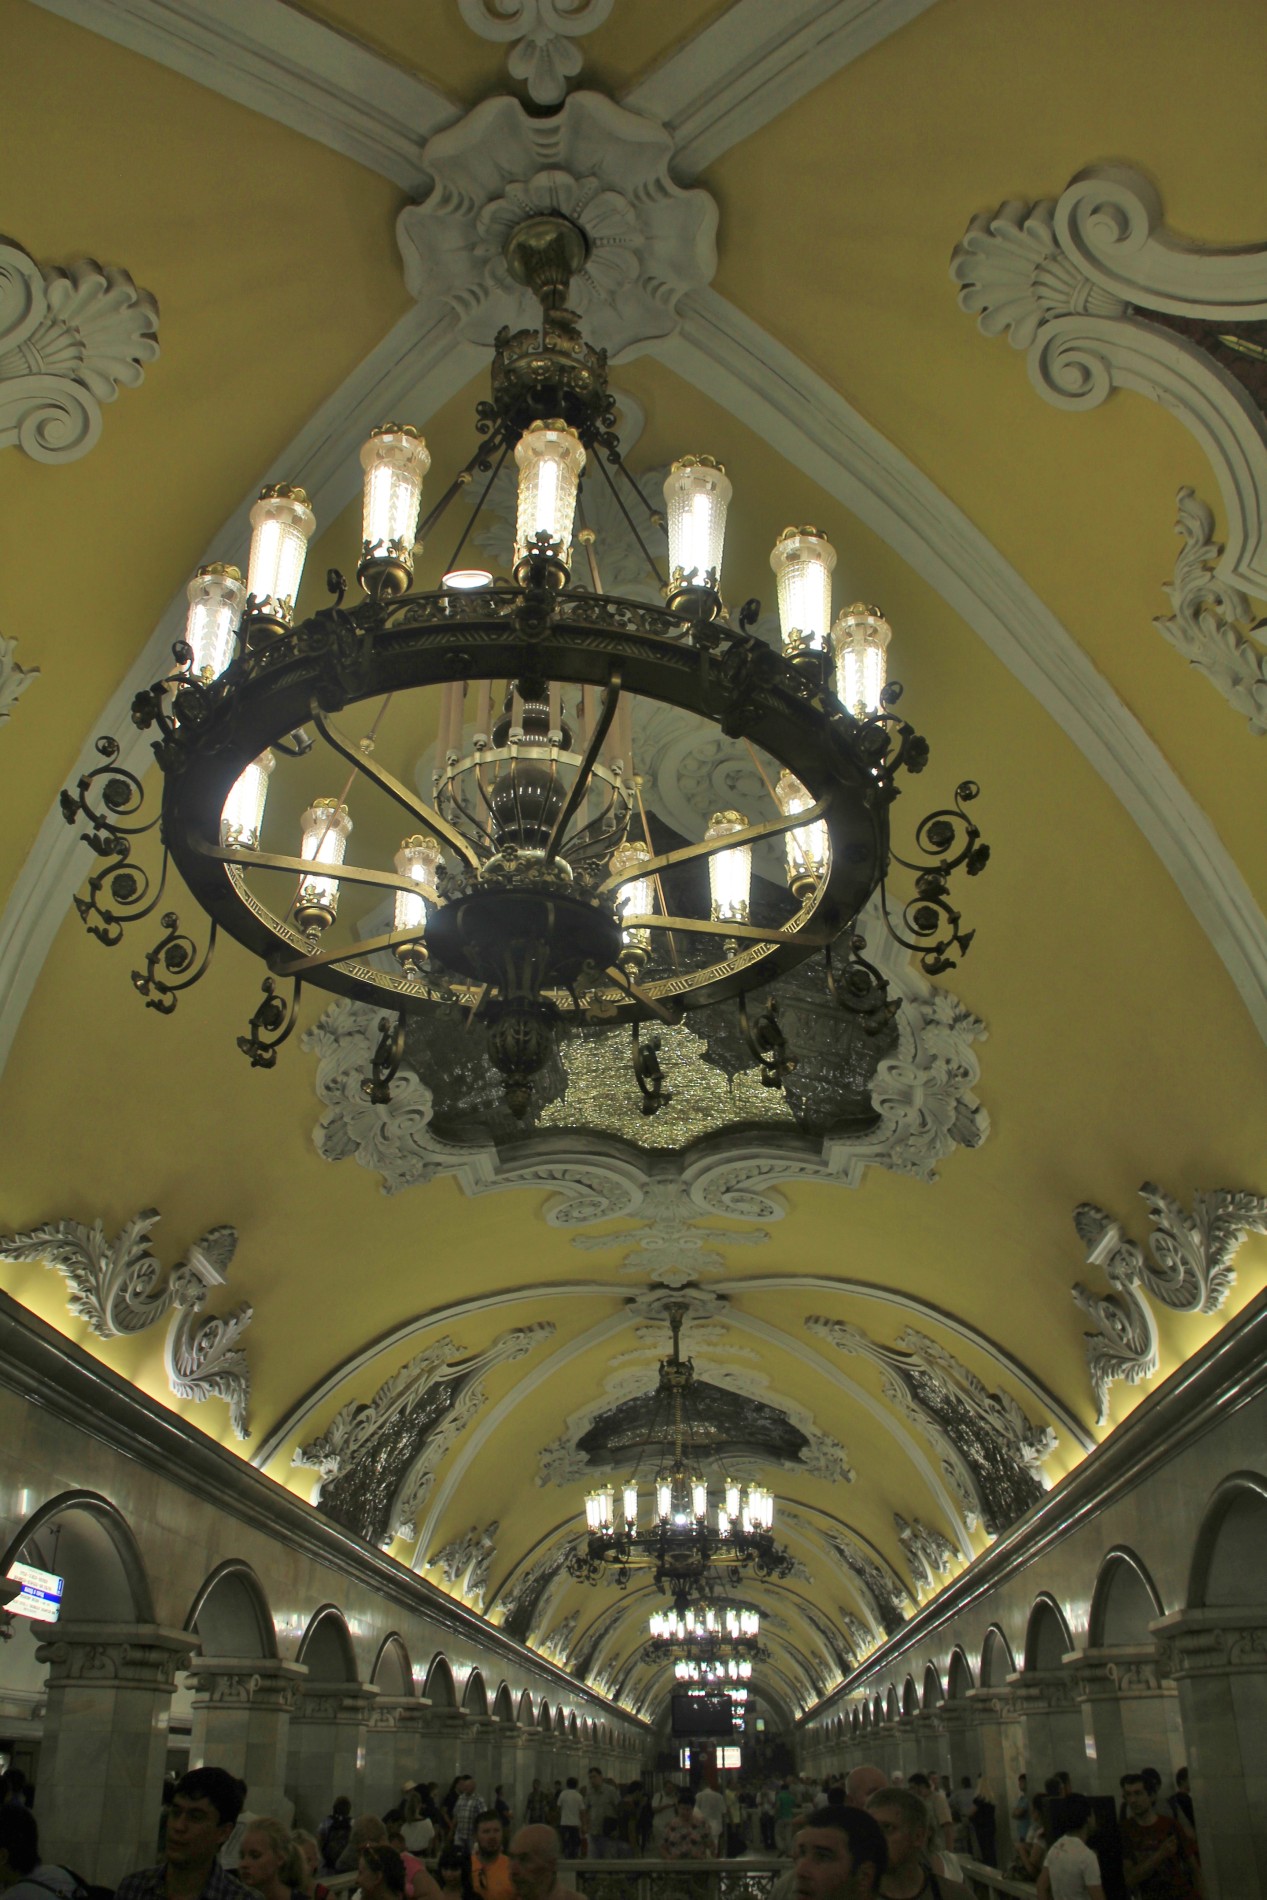 The Moscow Metro's Komsomolskaya Station features baroque design, Corinthian columns, arched yellow ceilings, and ornate chandeliers.